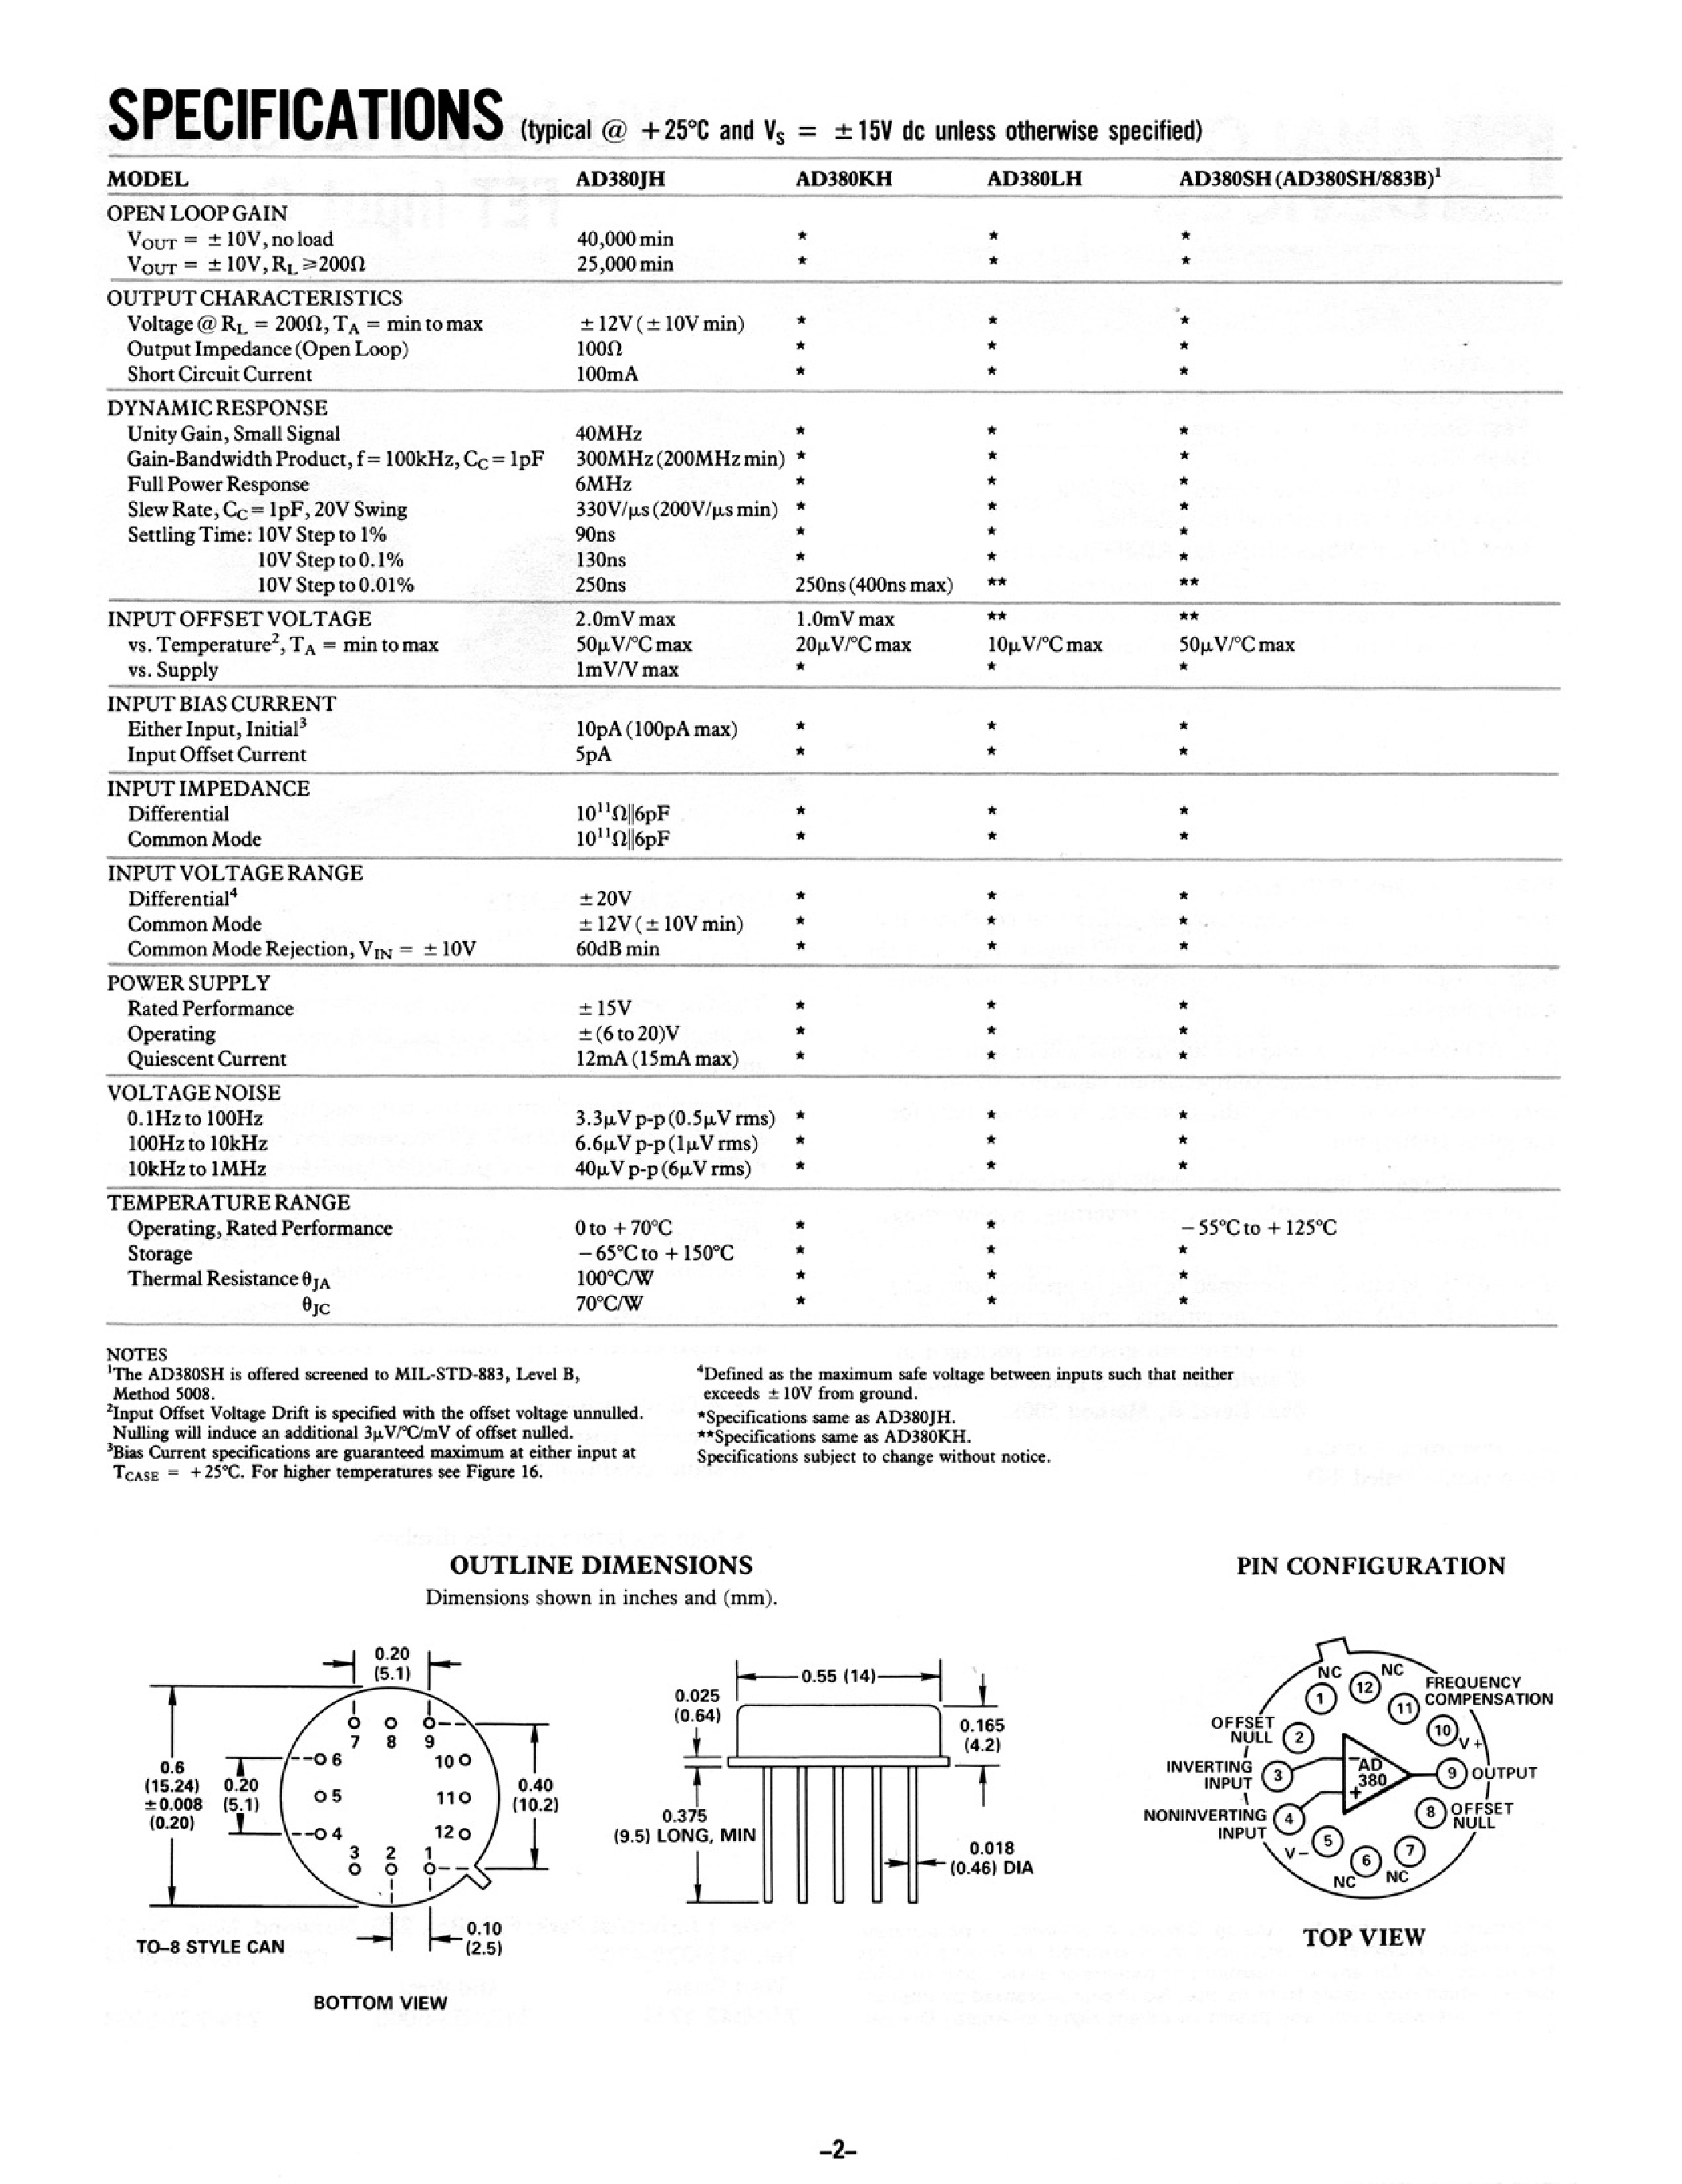 Datasheet AD380KH - WIDEBAND/ FAST-SETTING FET-INPUT OP AMP page 2